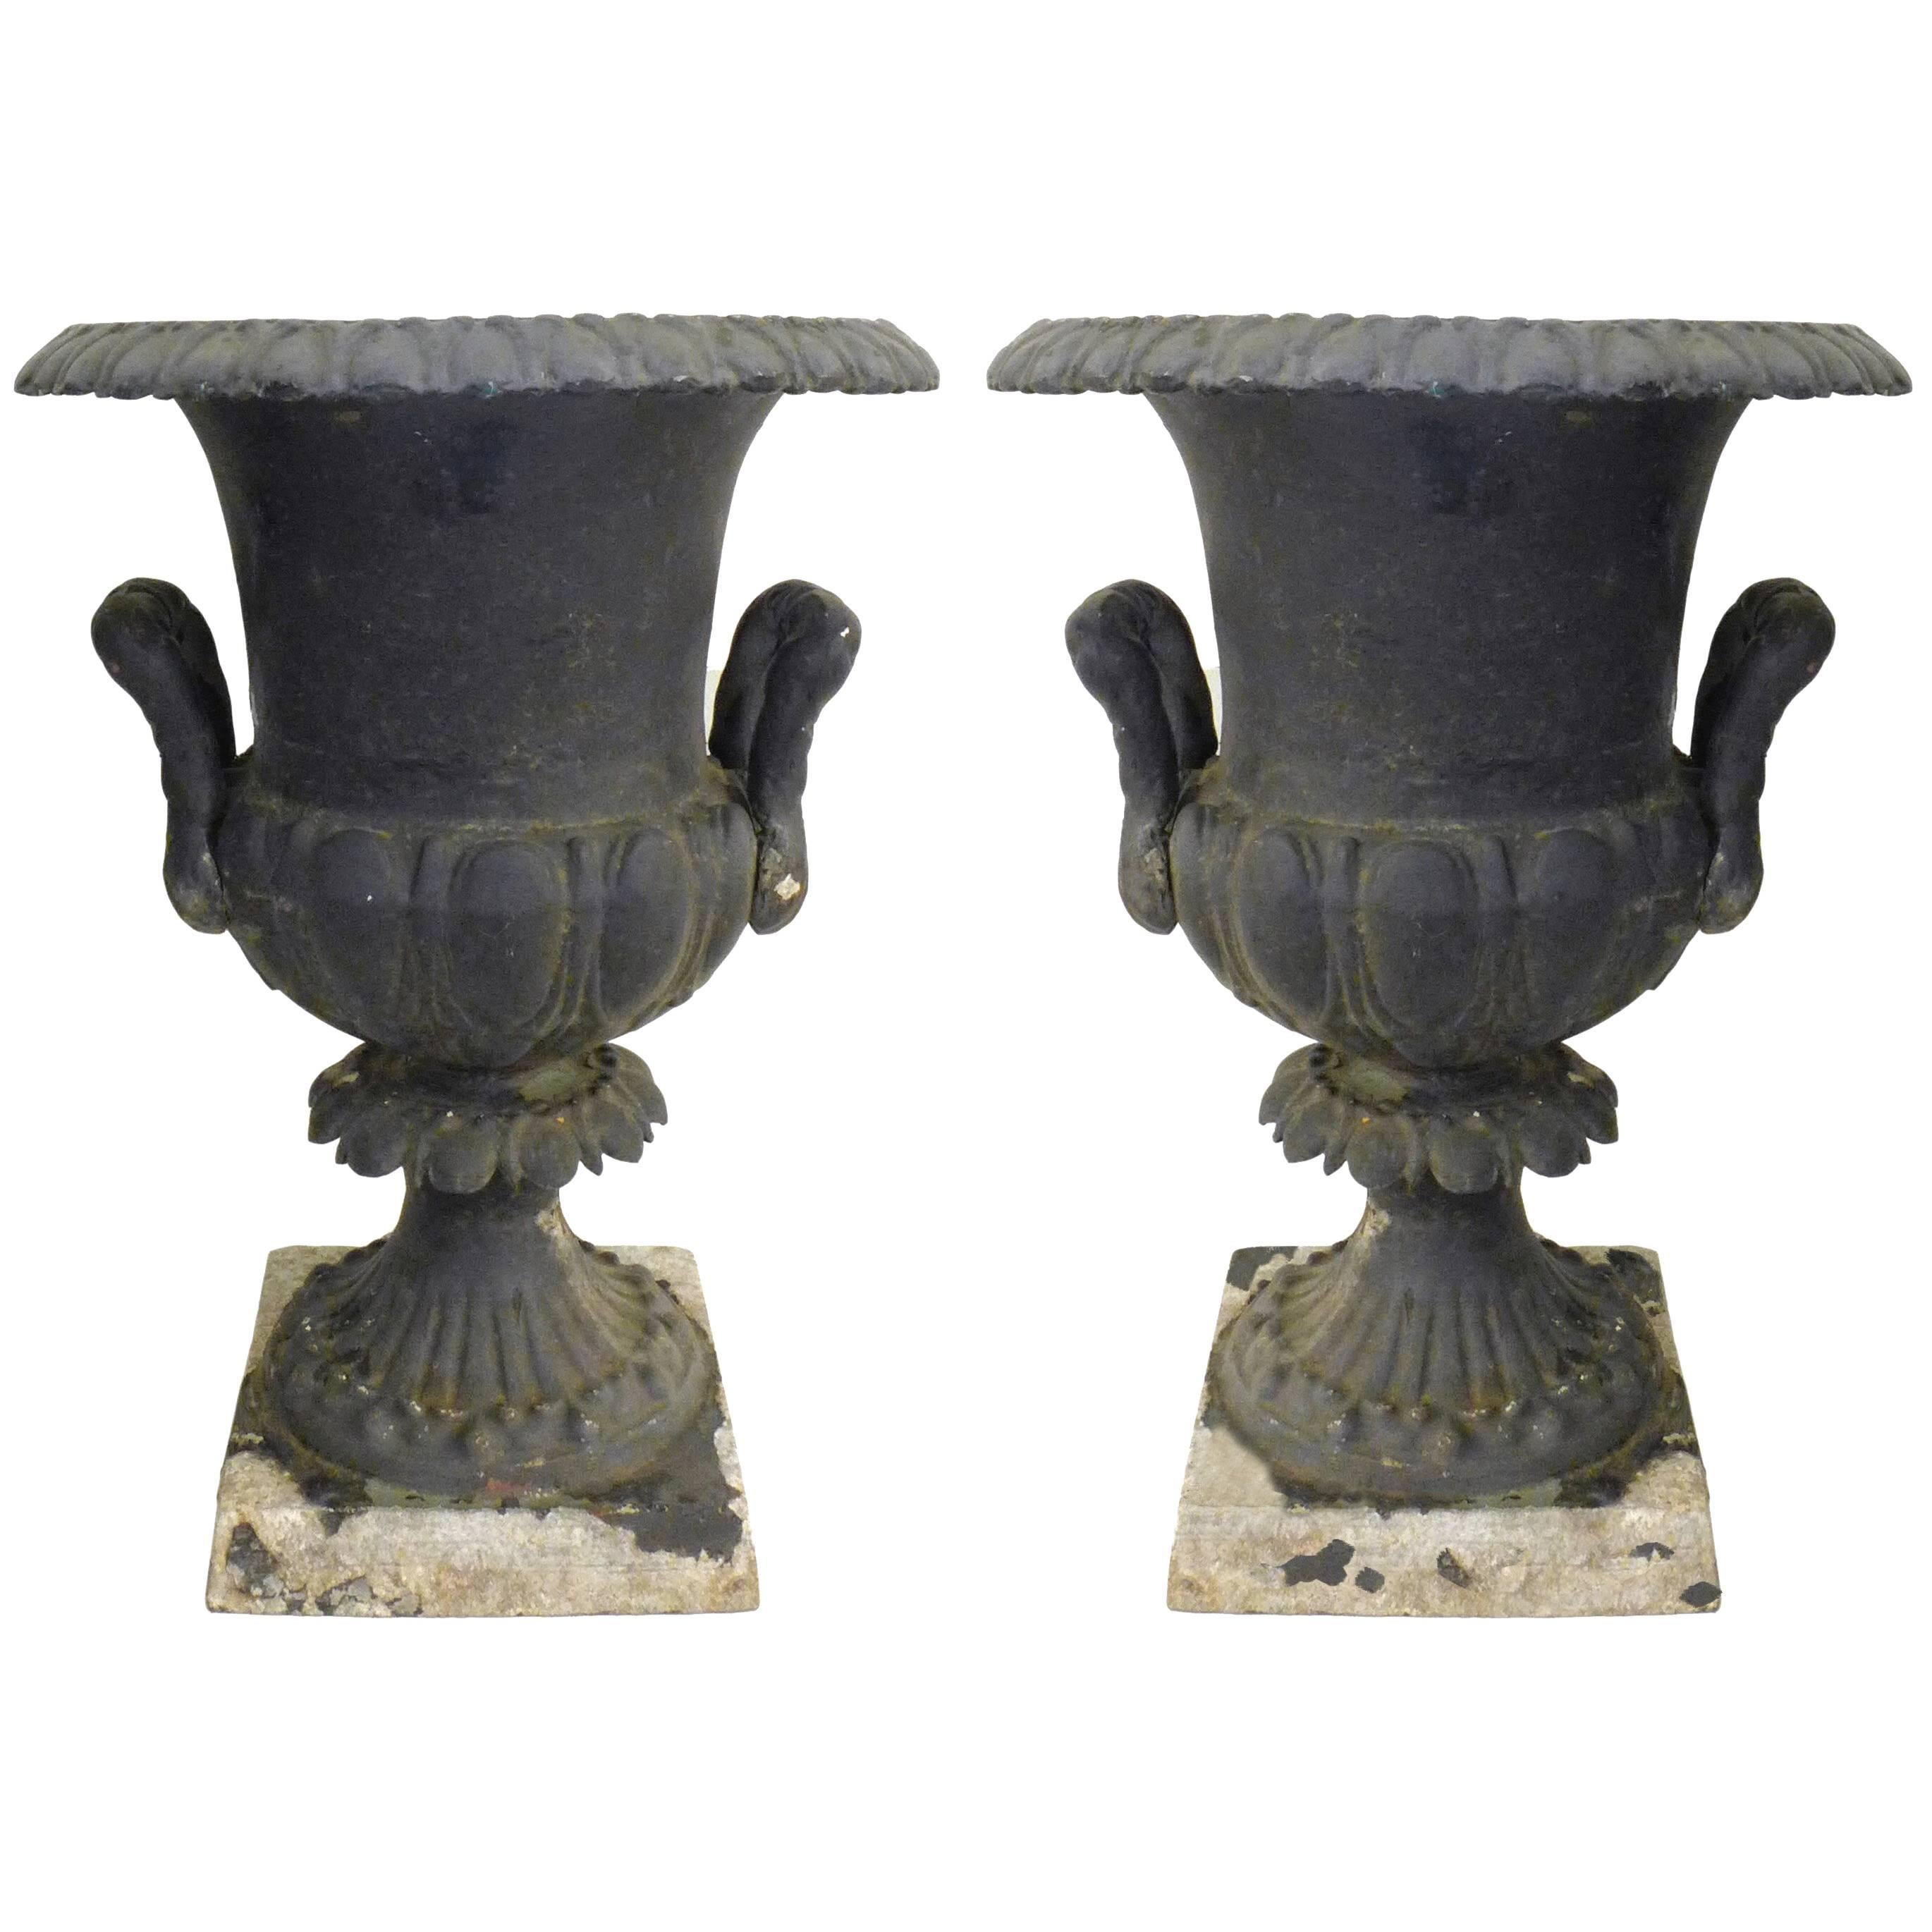 Pair of Zinc-Plated Decorative Urns